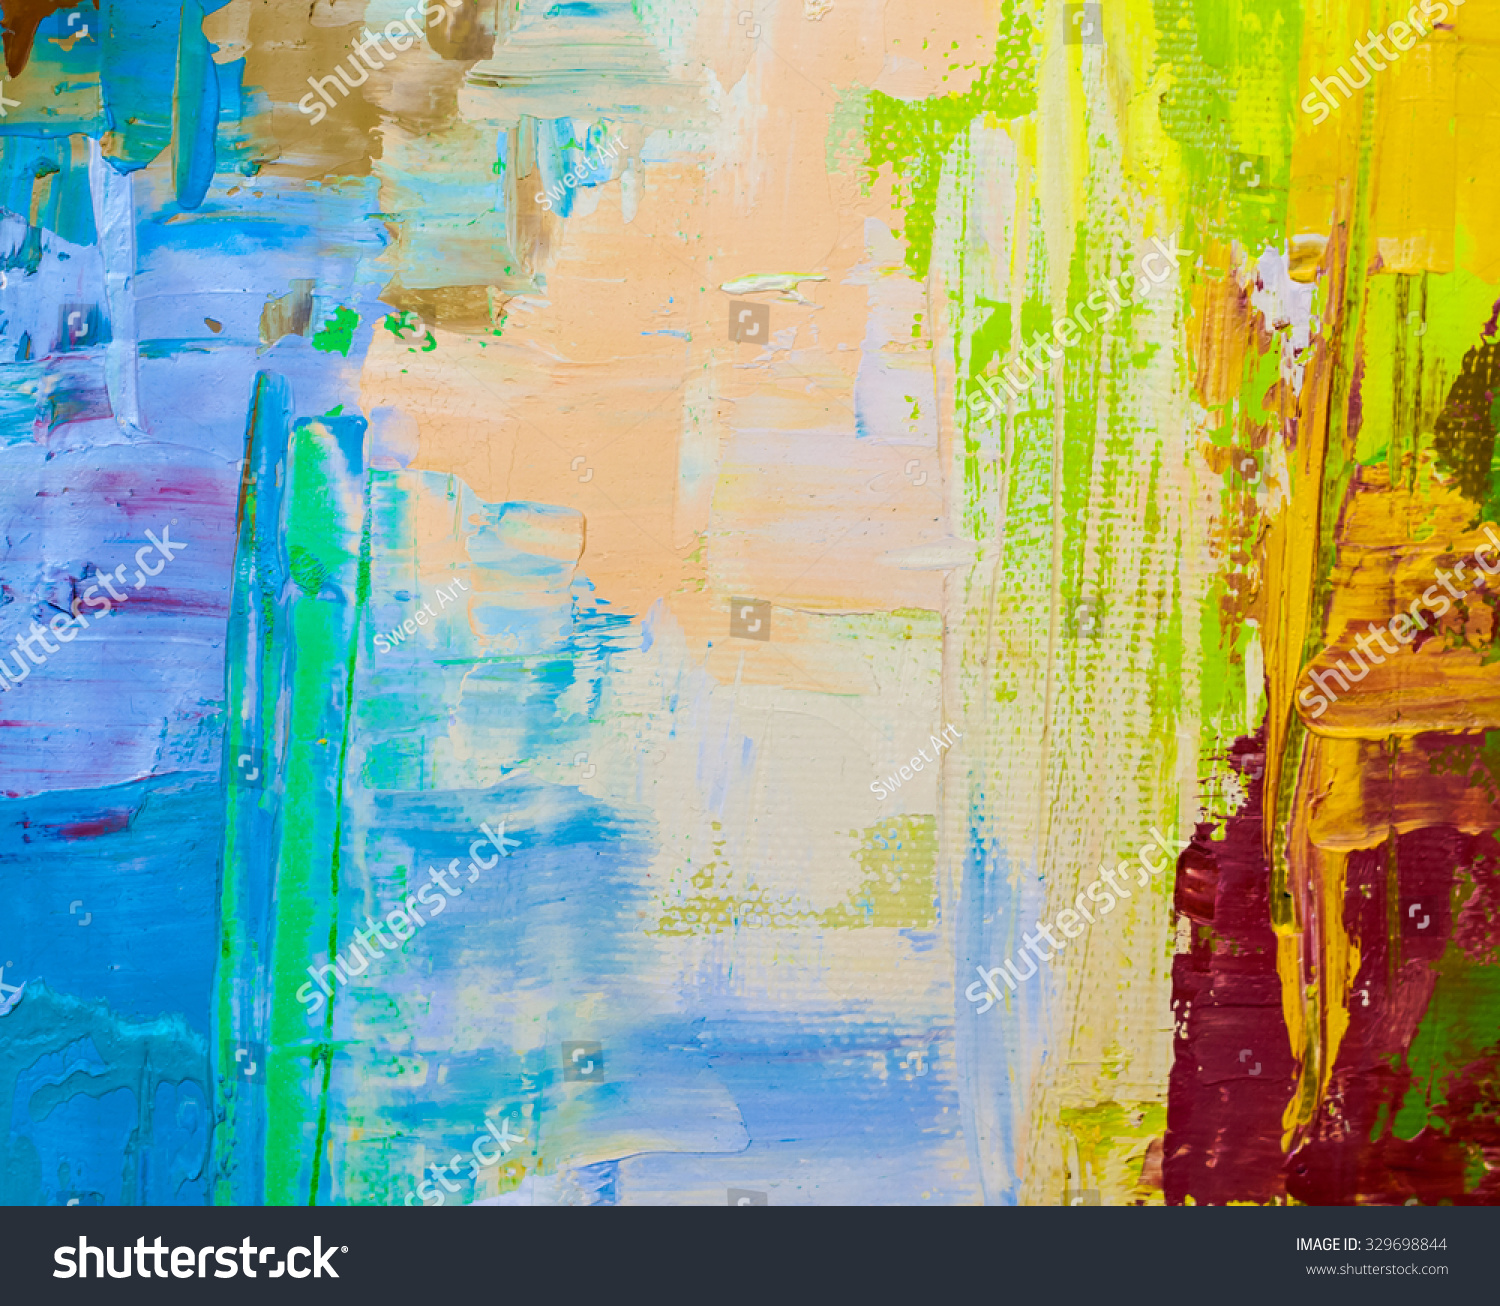 Abstract Art Background Oil Painting On Stock Illustration 329698844 ...